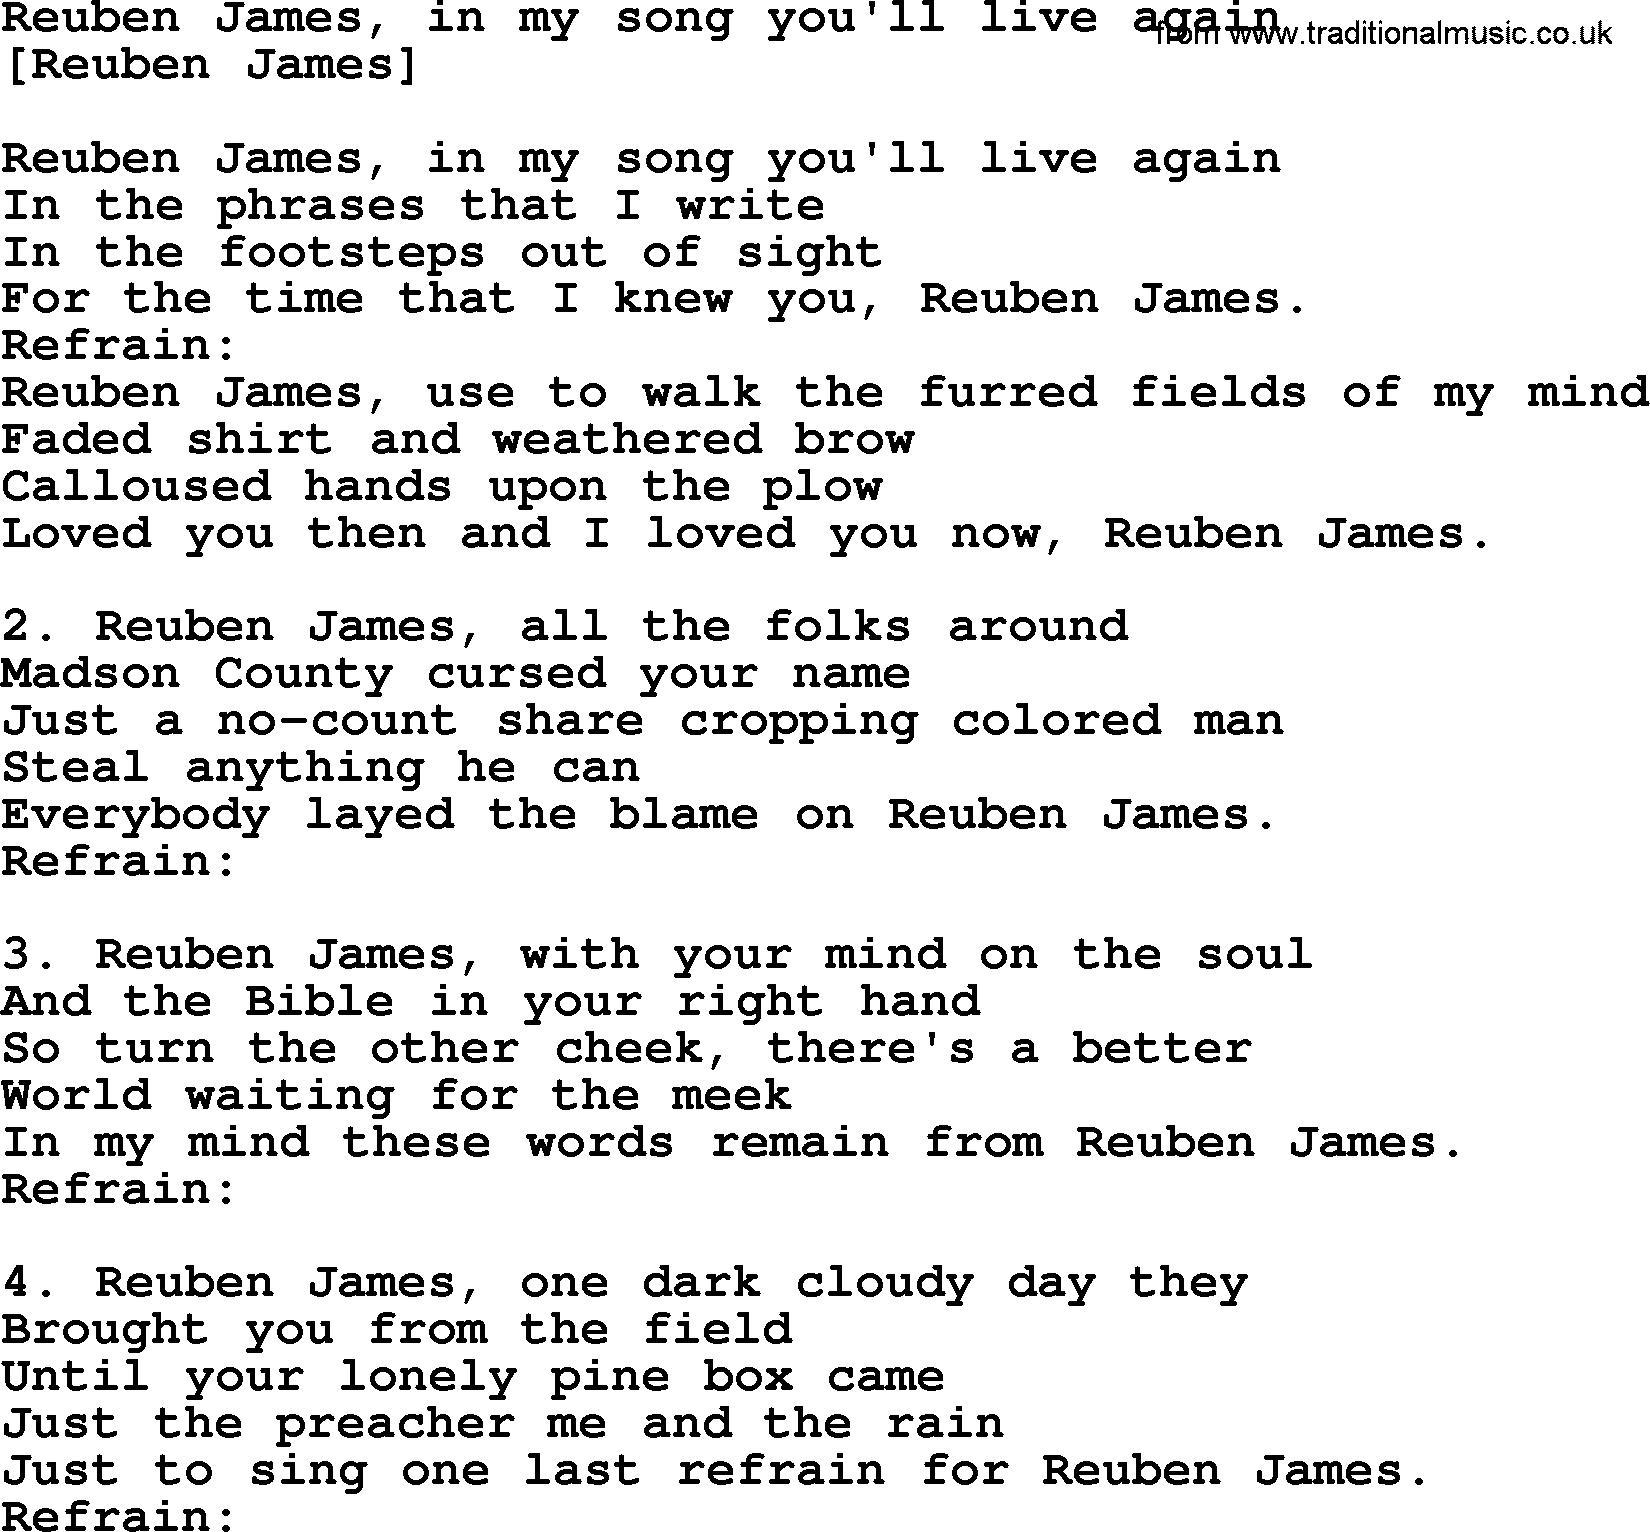 Old American Song: Reuben James, In My Song You'll Live Again, lyrics